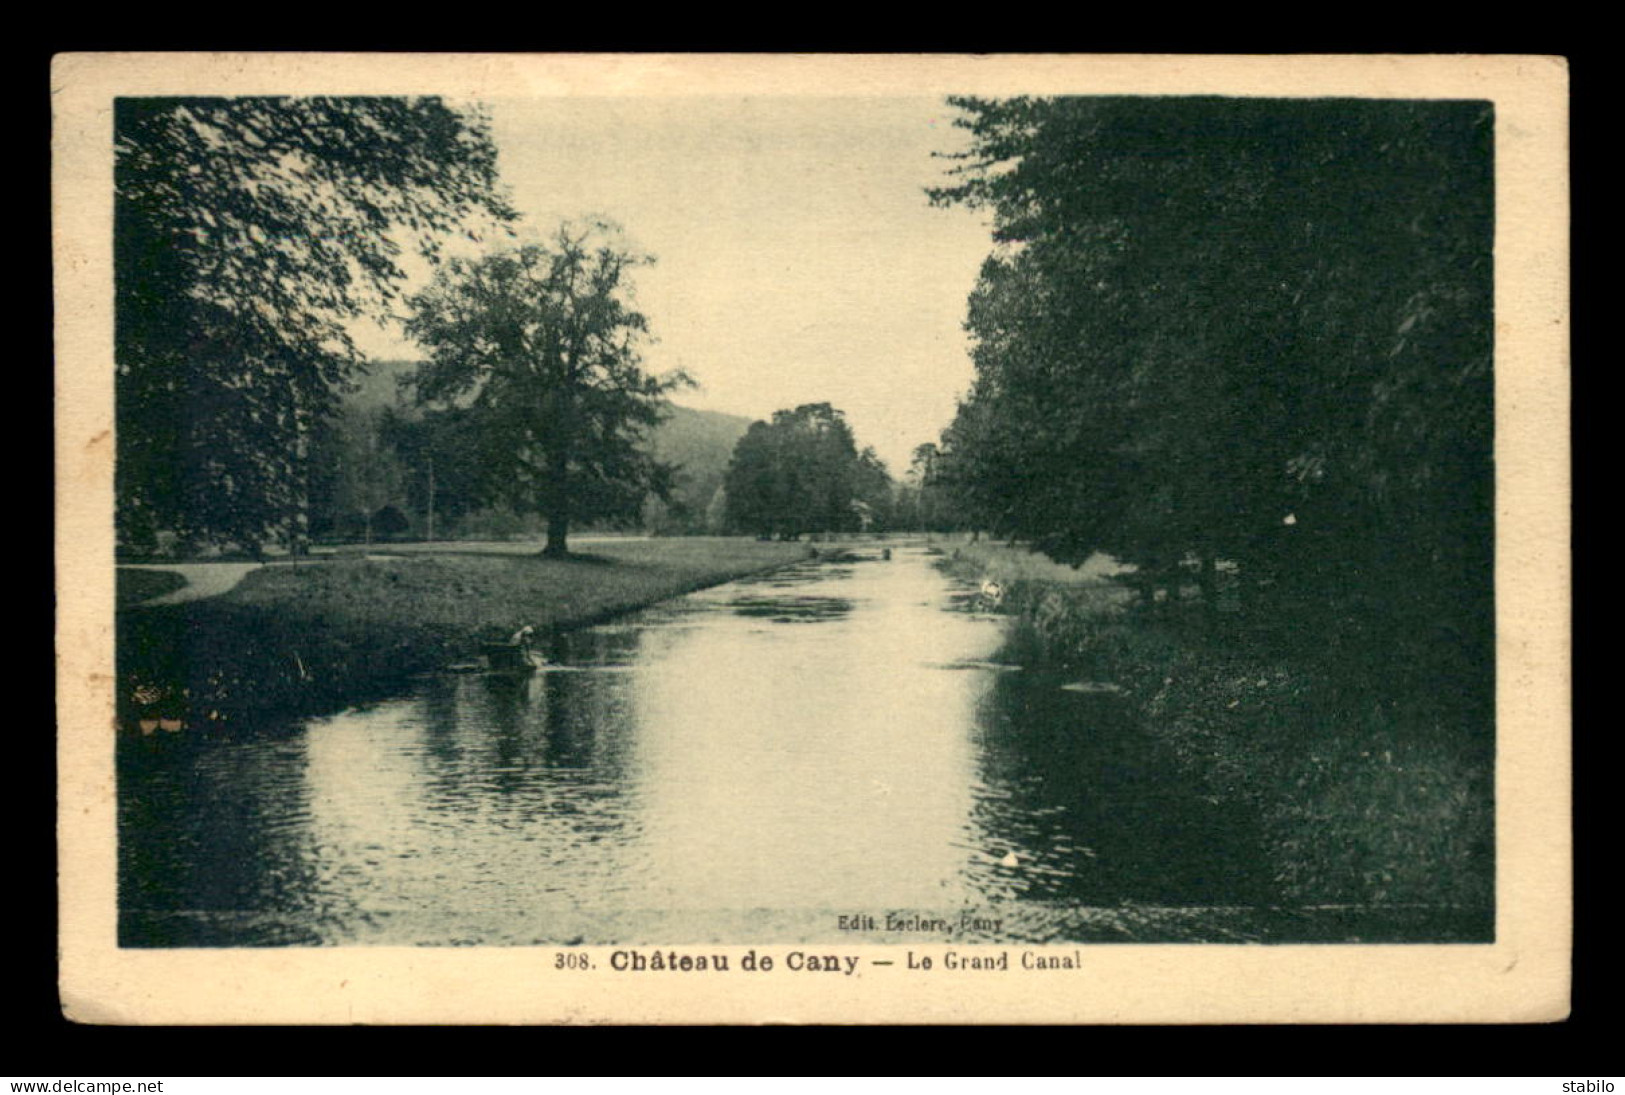 76 - CHATEAU DE CANY - LE GRAND CANAL - Cany Barville